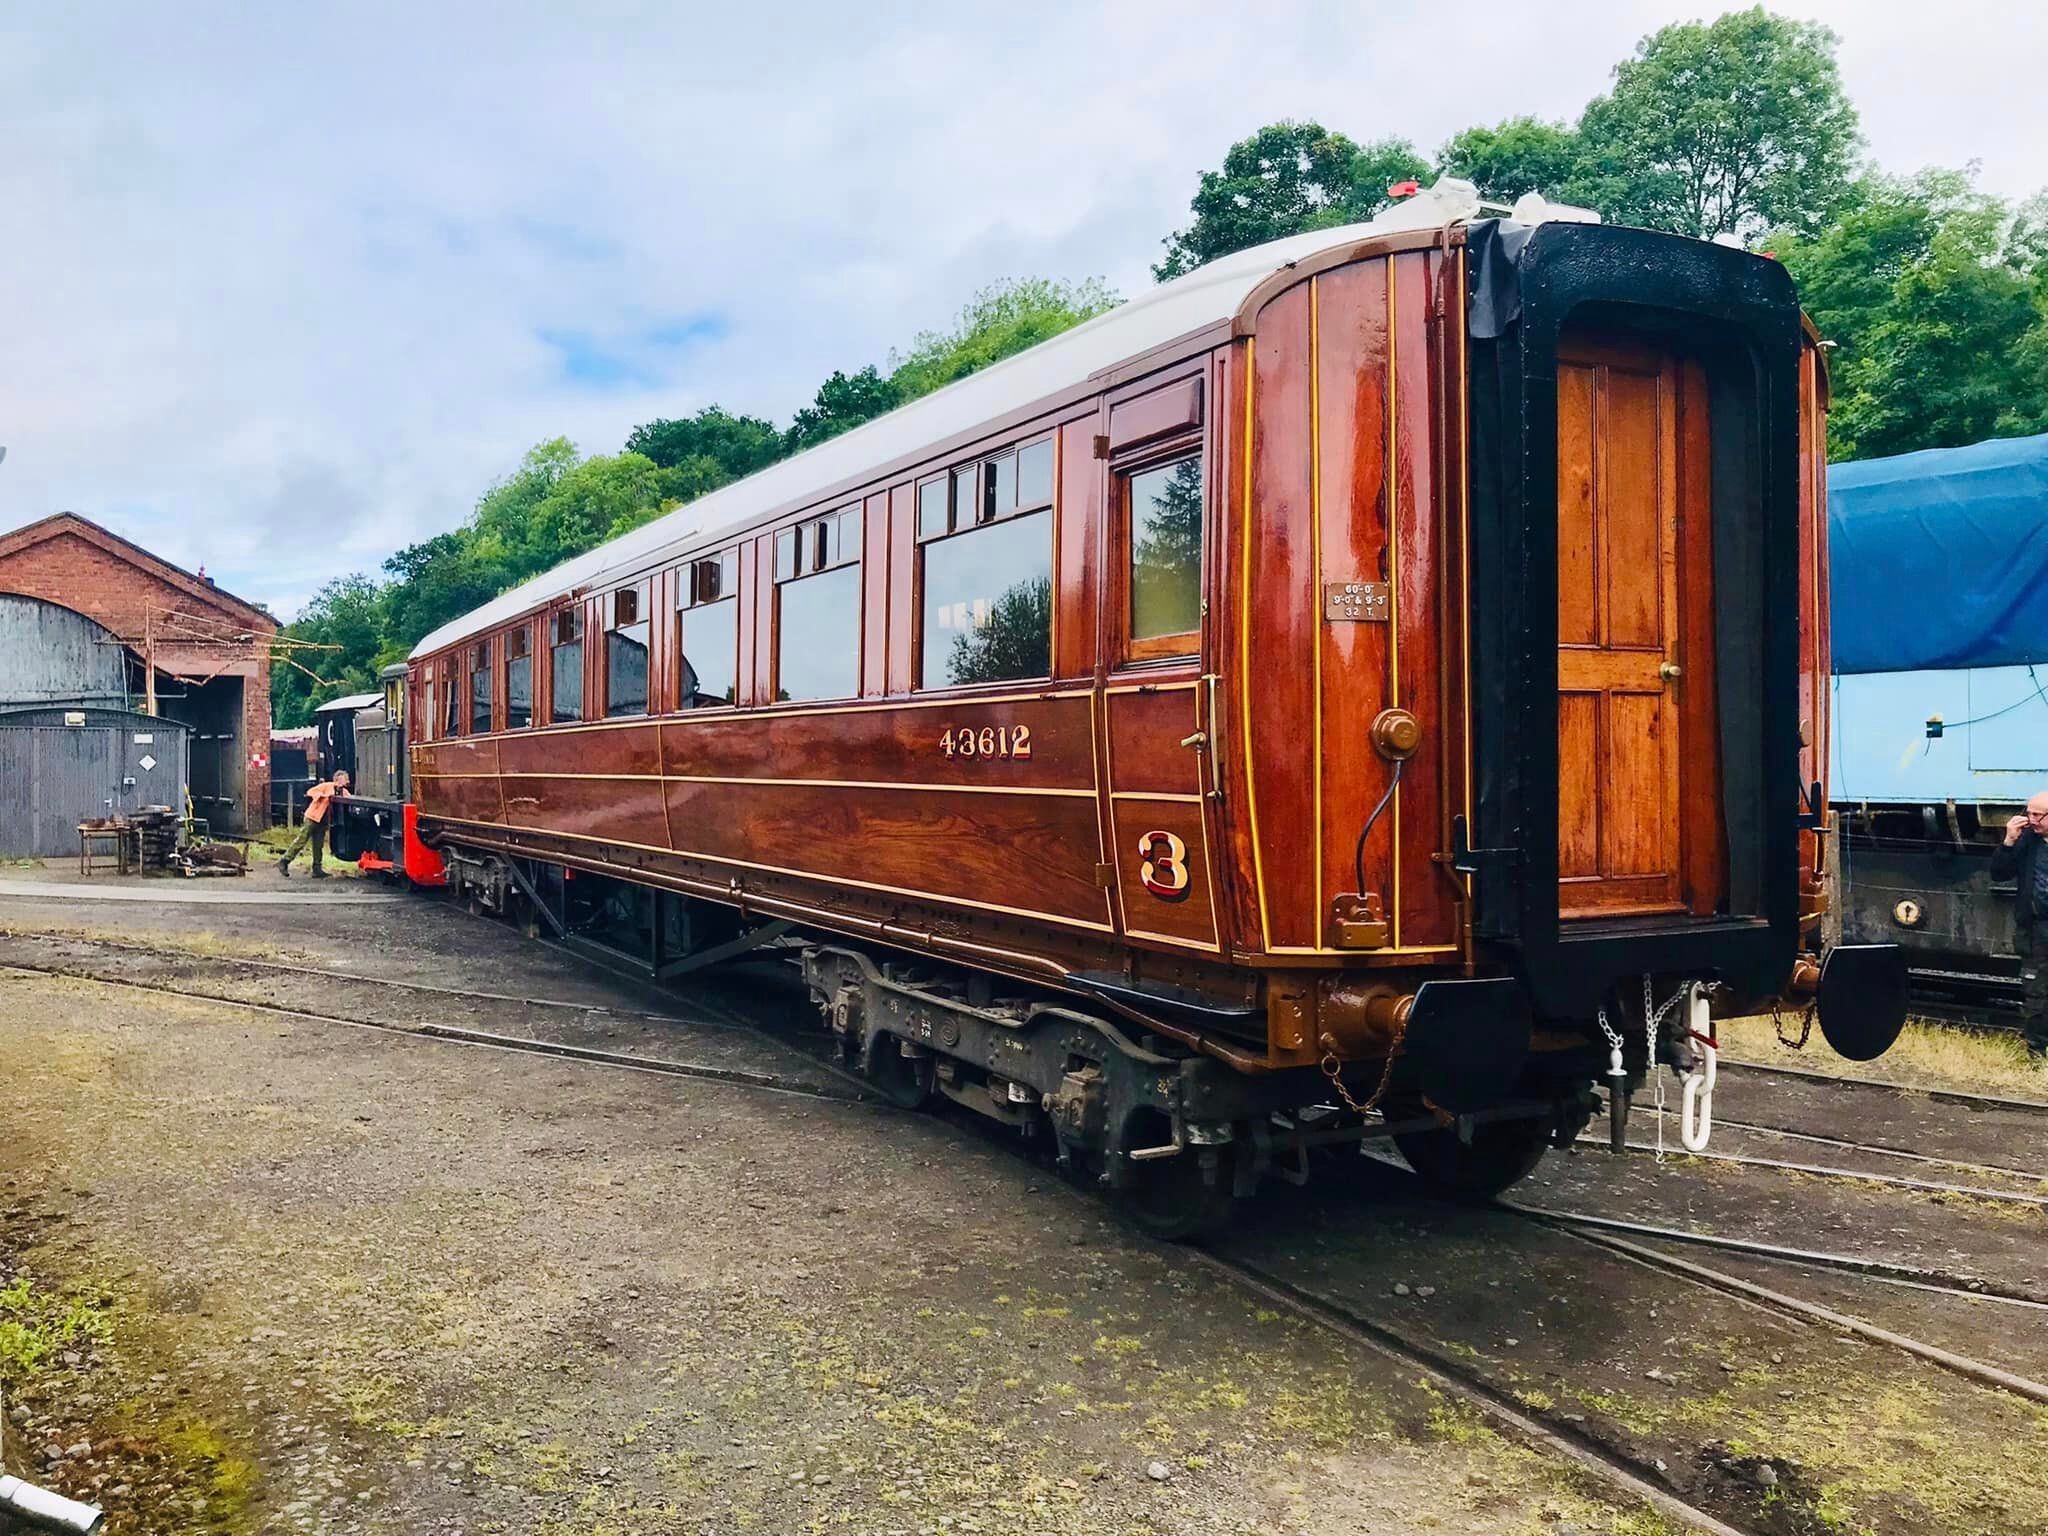 See the painstaking Severn Valley Railway carriage restoration that volunteers spent 6,000 hours on